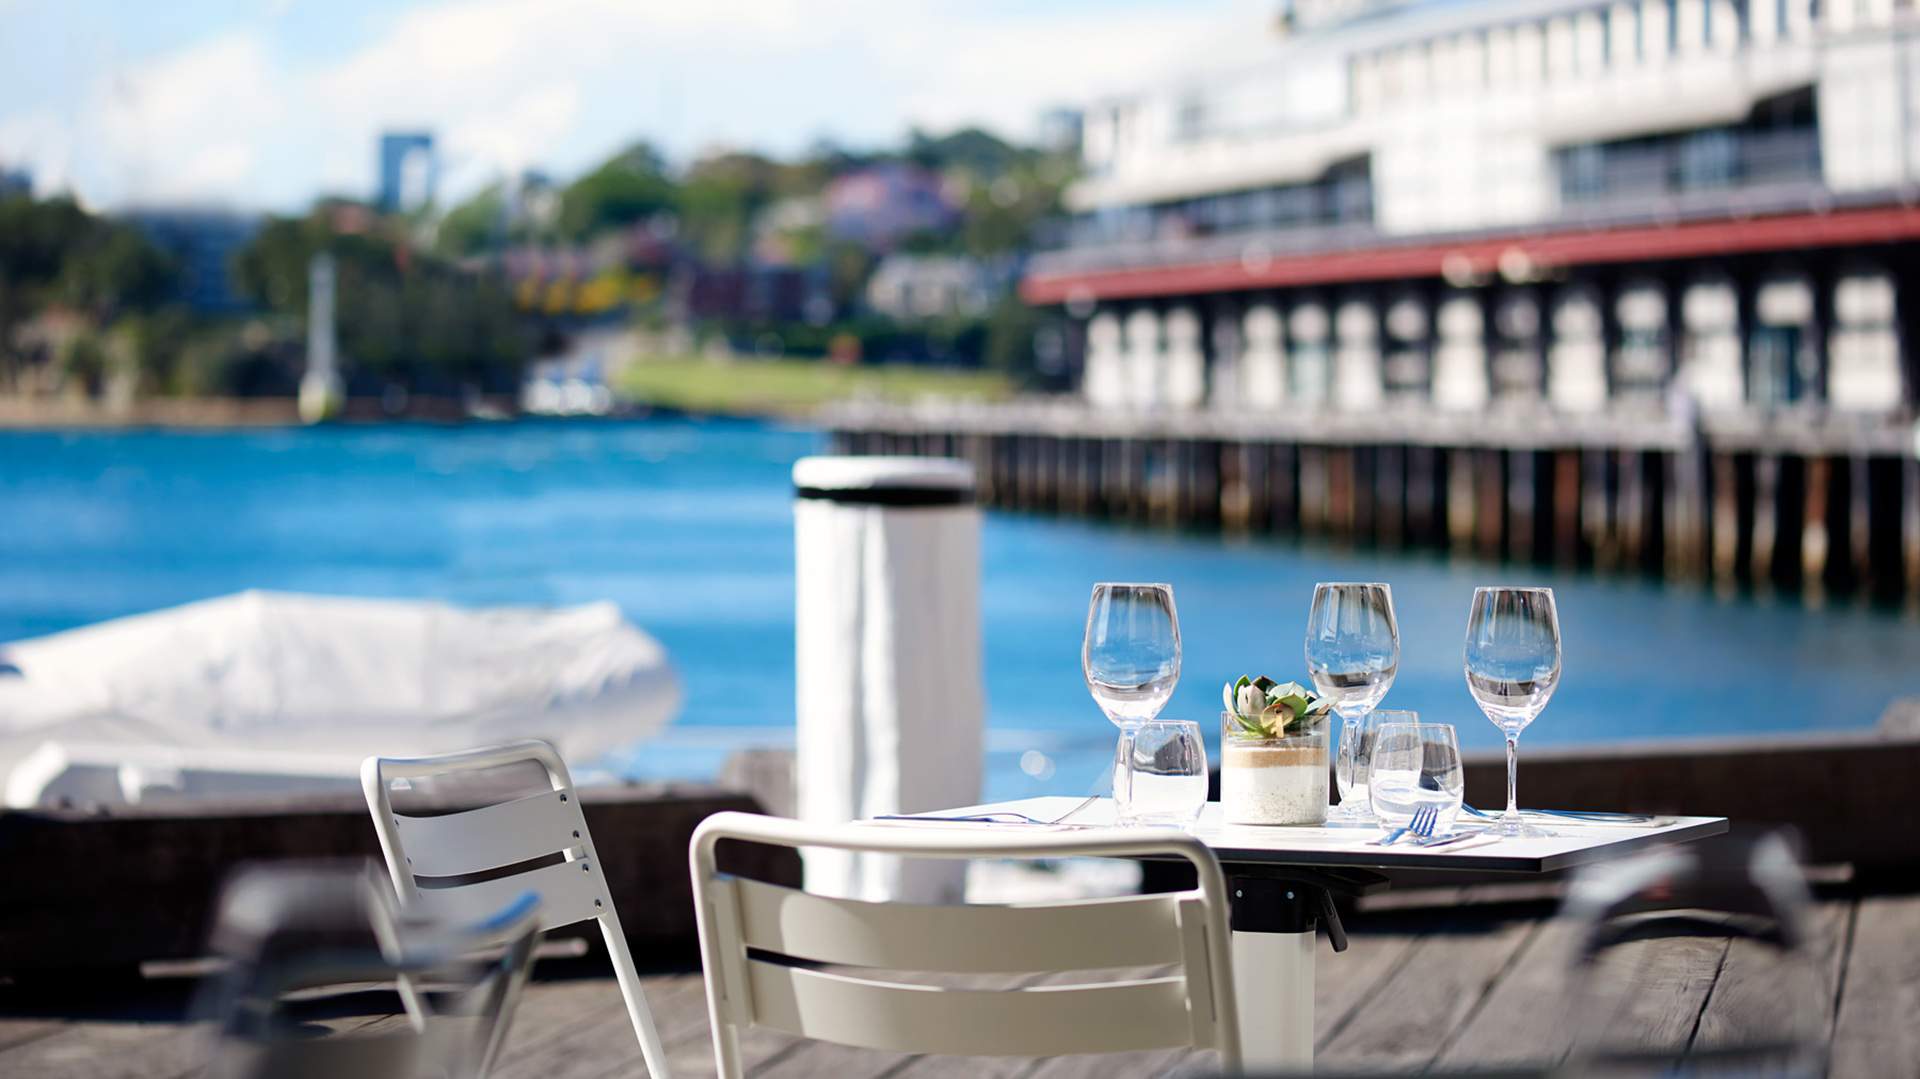 Sydney and Brisbane Have Been Named Among the World's Top Ten Foodie Destinations to Watch